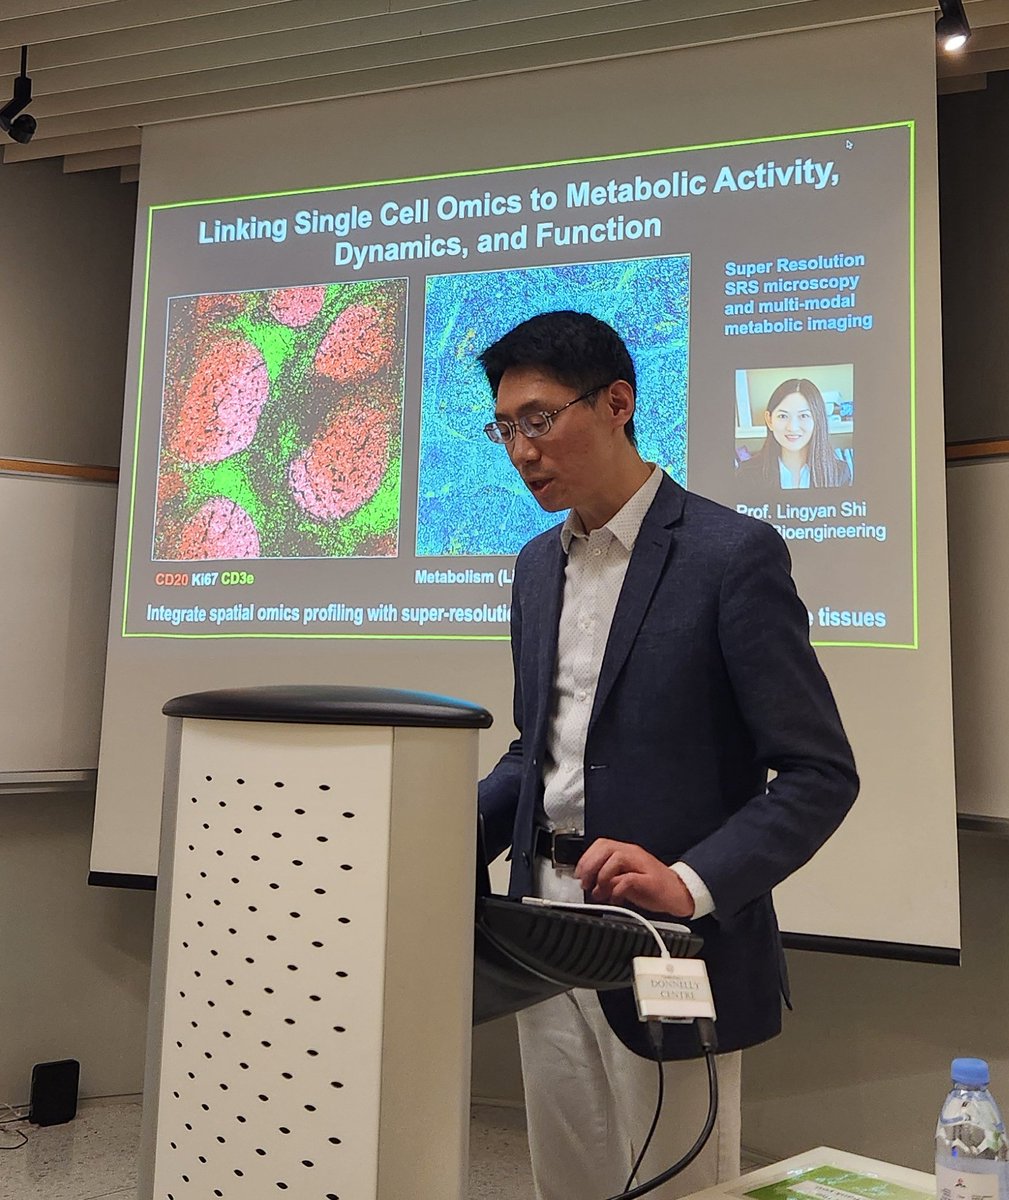 Very happy to host @RongFan8 from @Yale for a mind blowing talk on single cell omics @DonnellyCentre @UofT